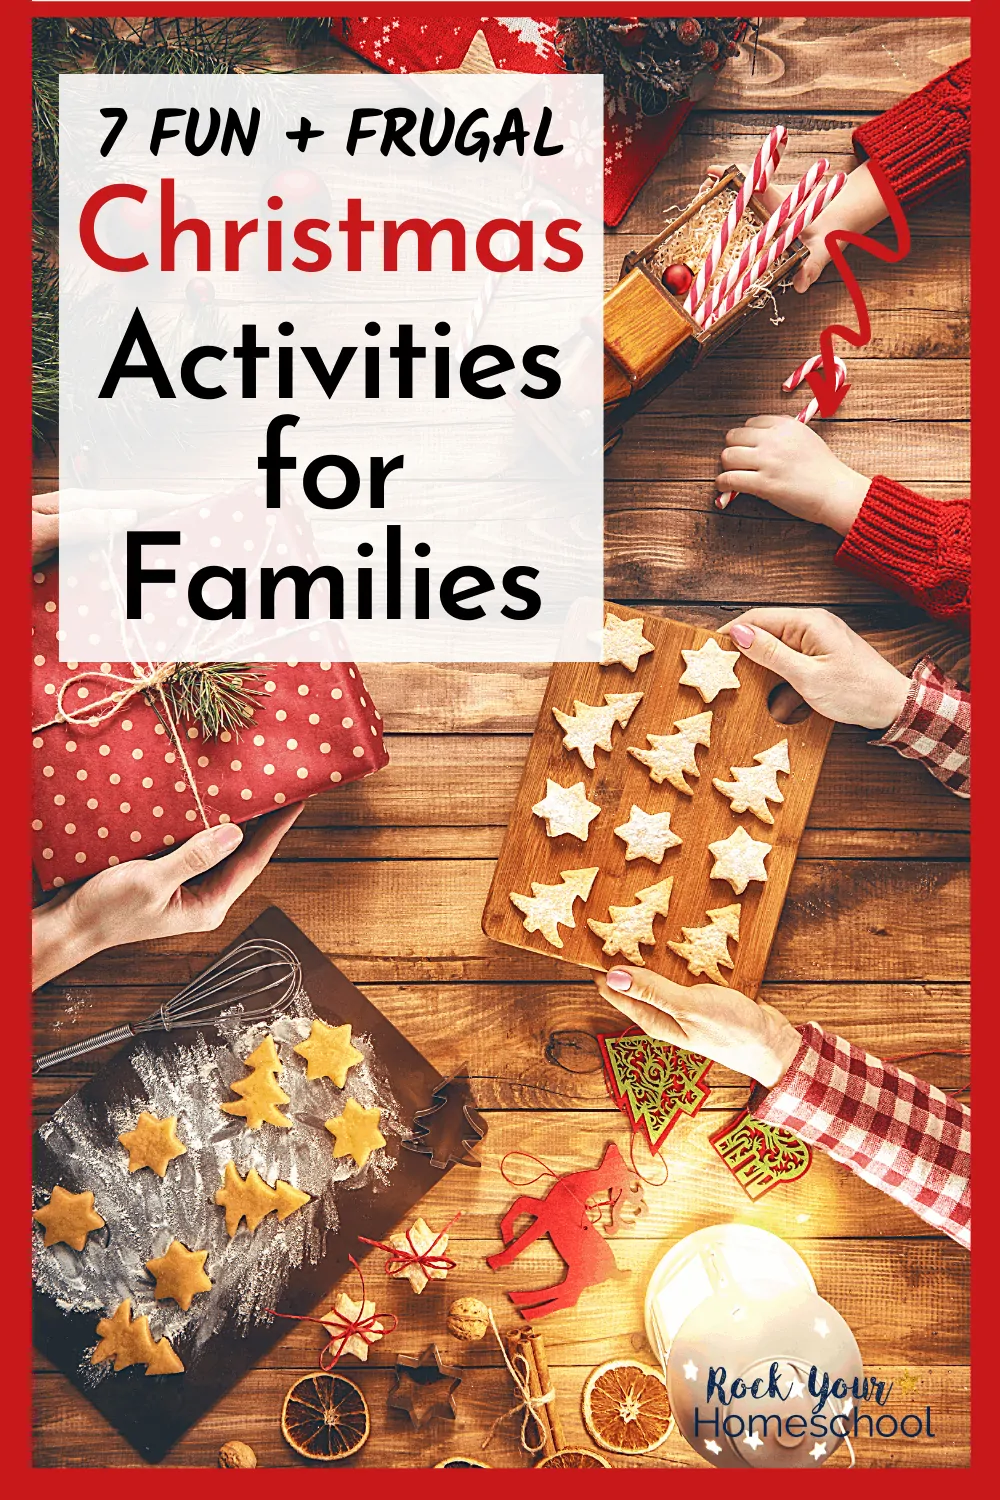 7 Frugal & Fun Christmas Activities for Families